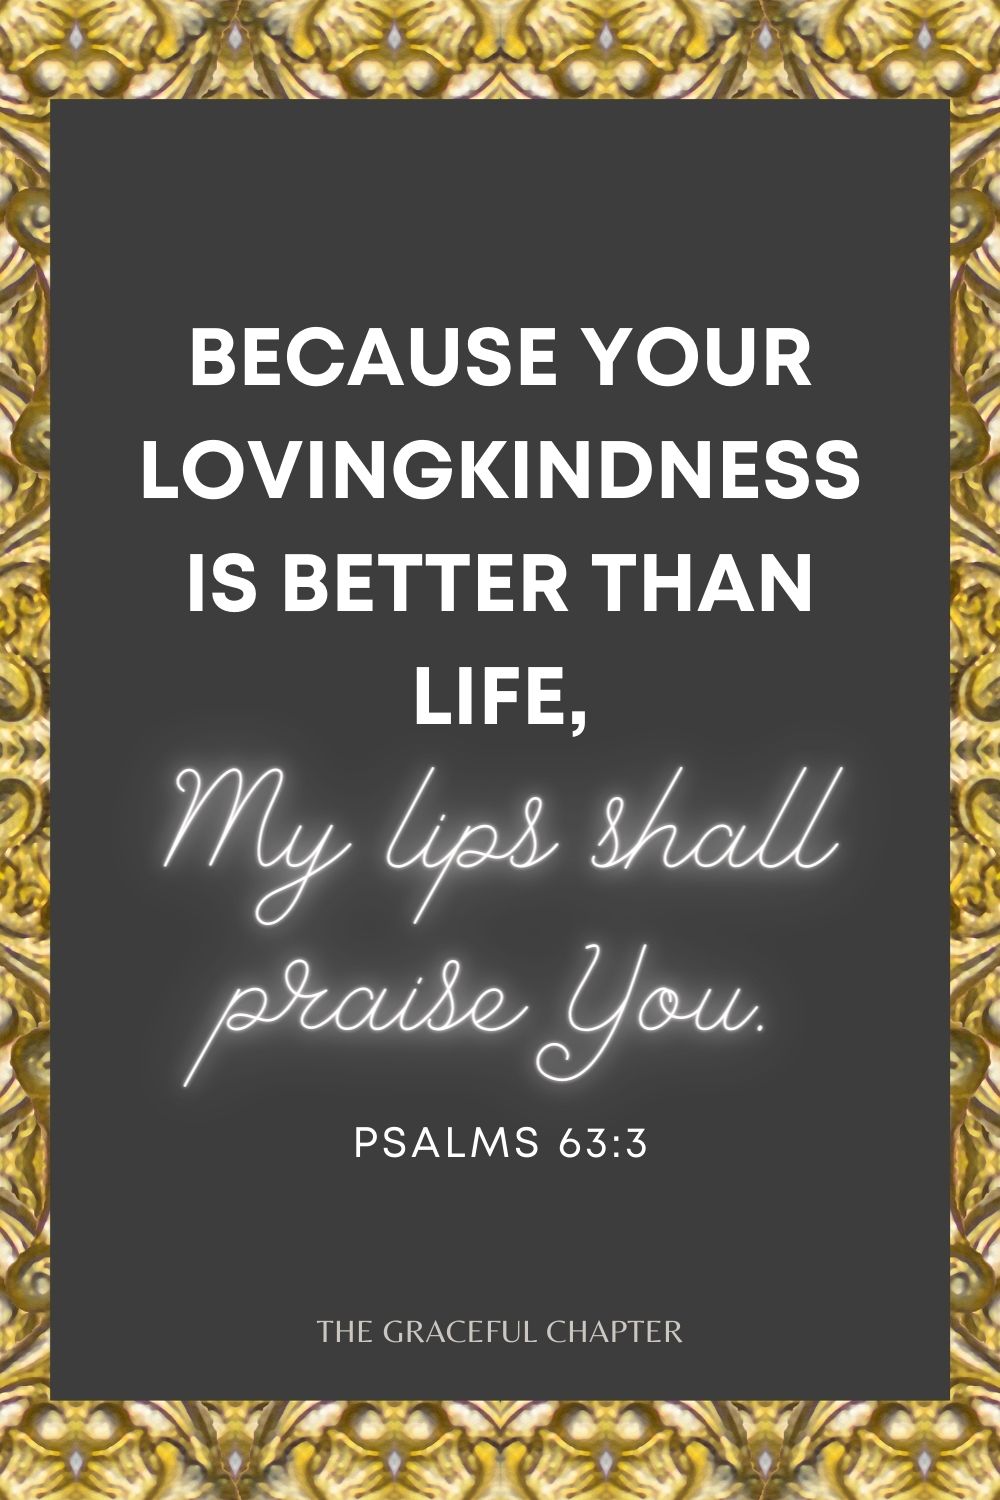 Because Your lovingkindness is better than life, My lips shall praise You. Psalms 63:3